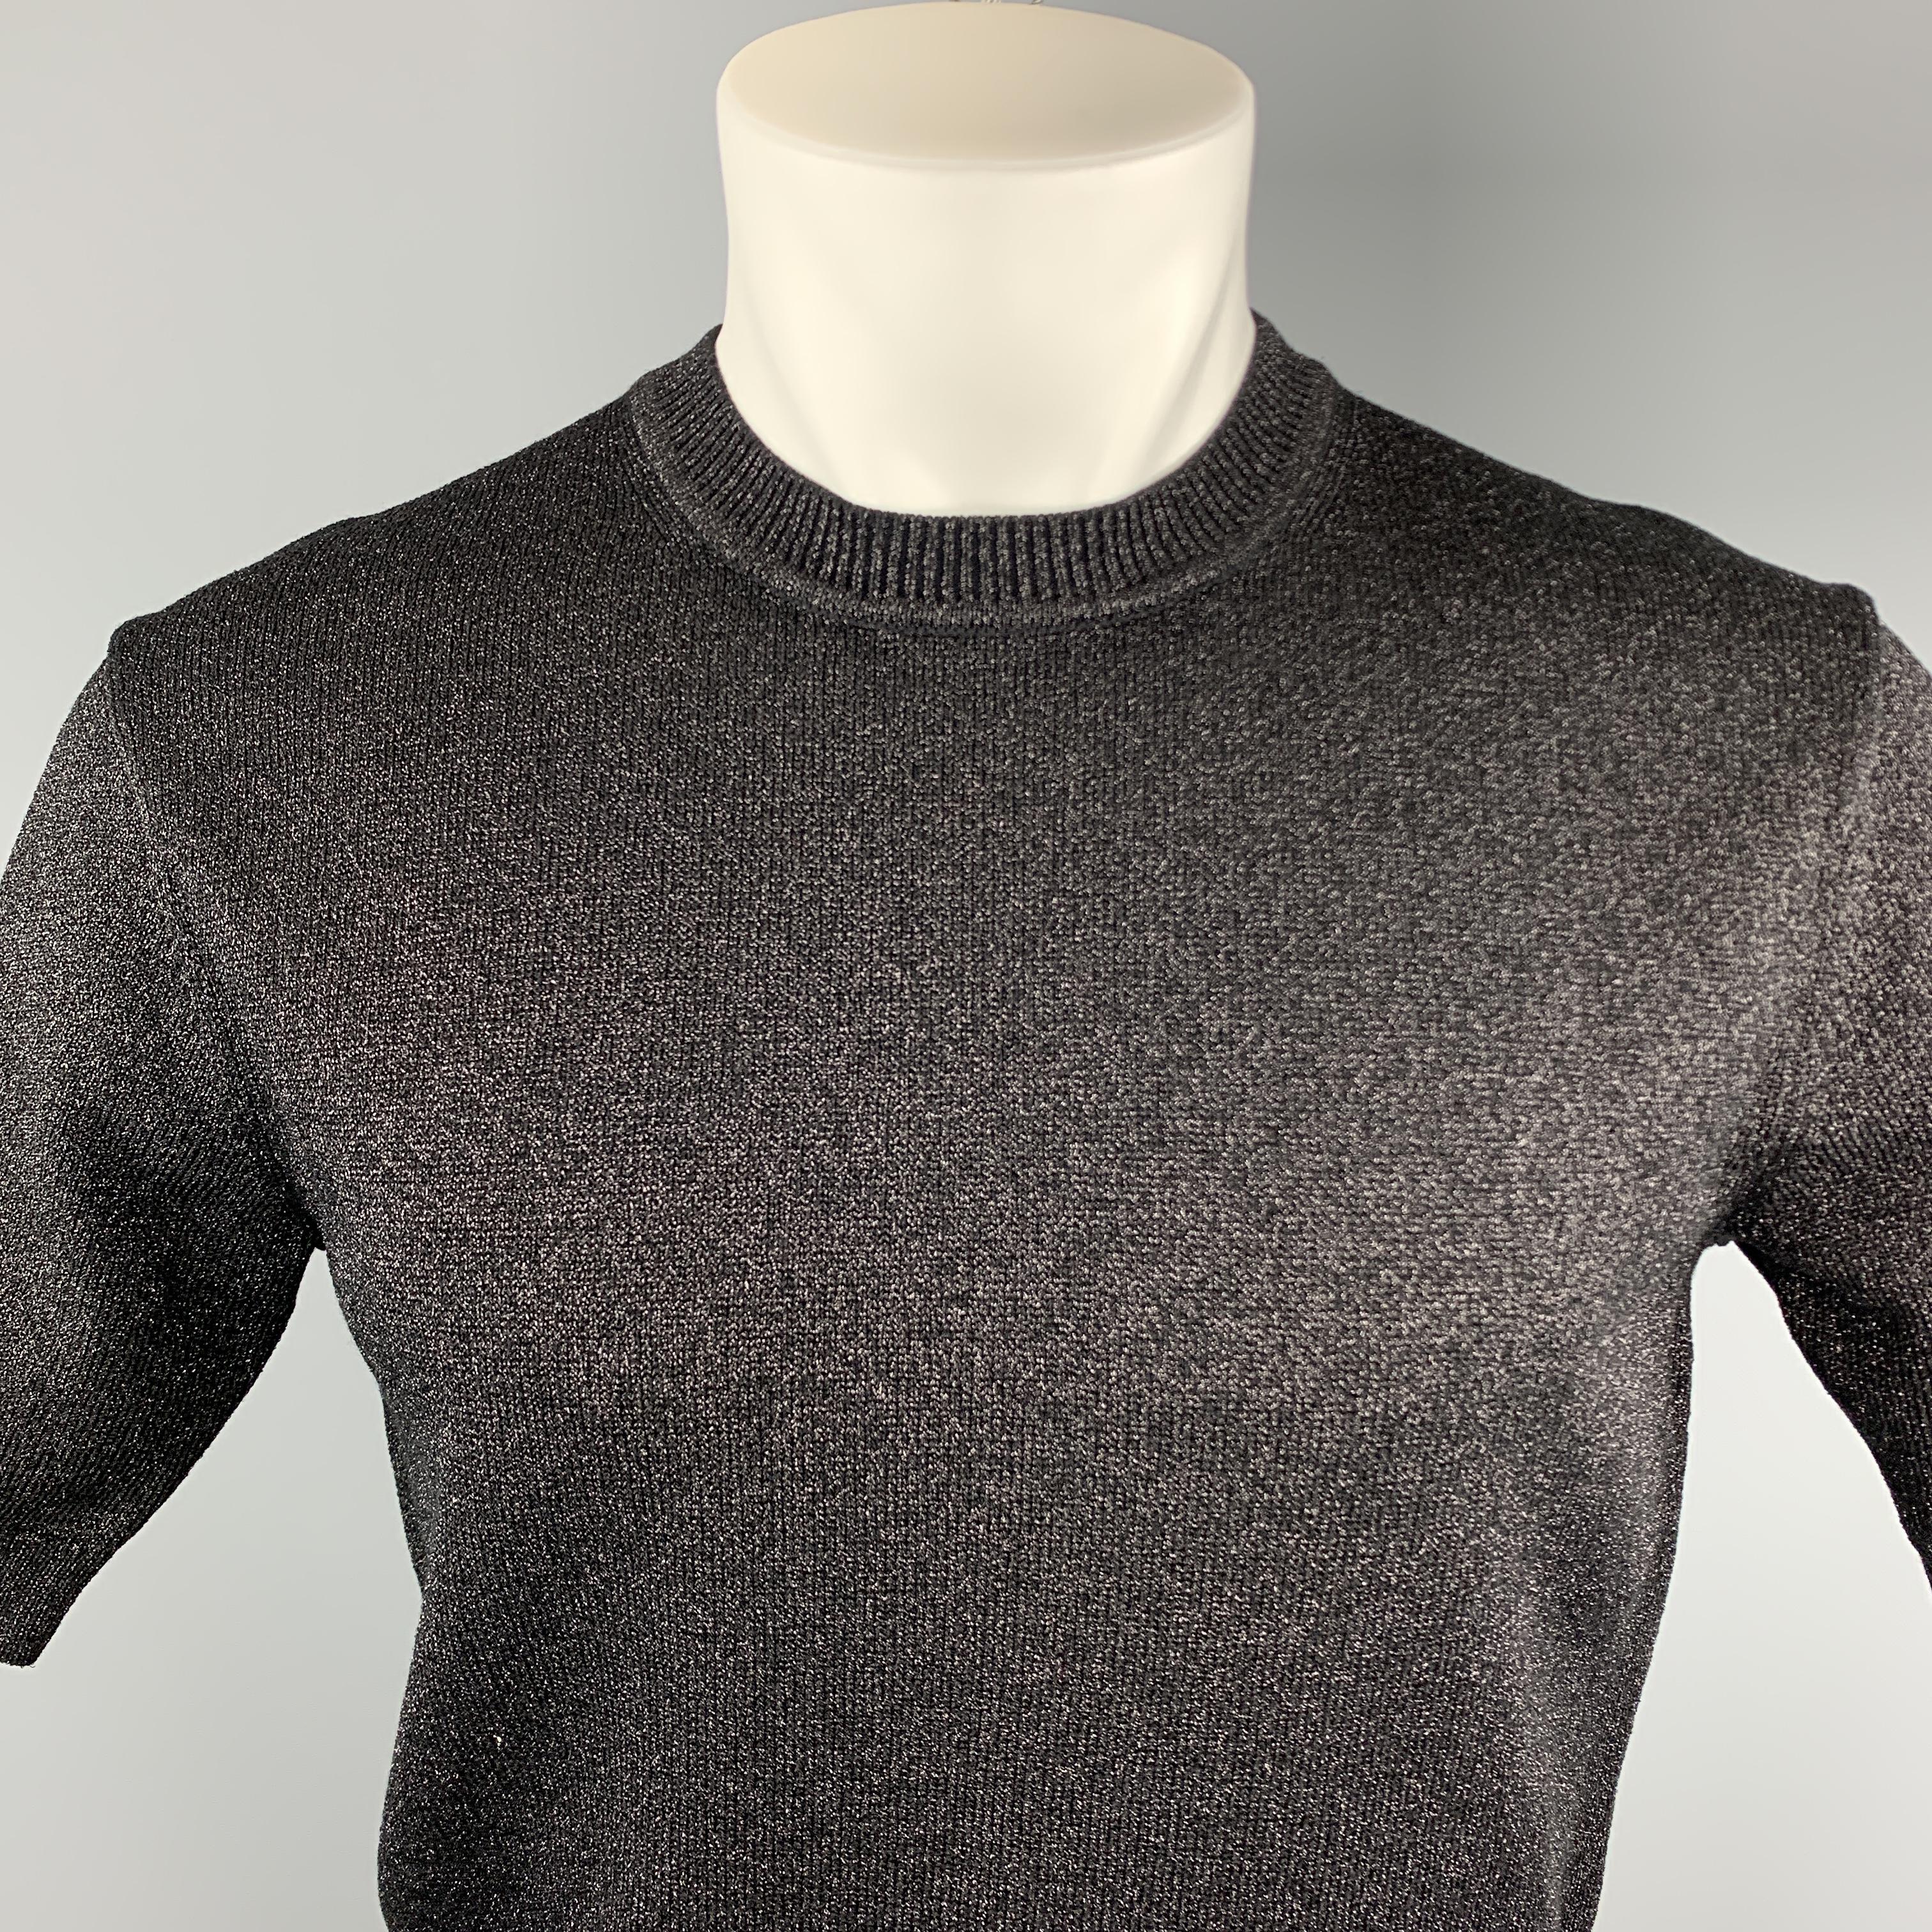 MARC JACOBS pullover comes in a black knitted metallic viscose blend featuring a short sleeve style and a ribbed crew-neck. Made in Italy.

Excellent Pre-Owned Condition.
Marked: XS

Measurements:

Shoulder: 18 in. 
Chest: 38 in. 
Sleeve: 11 in.